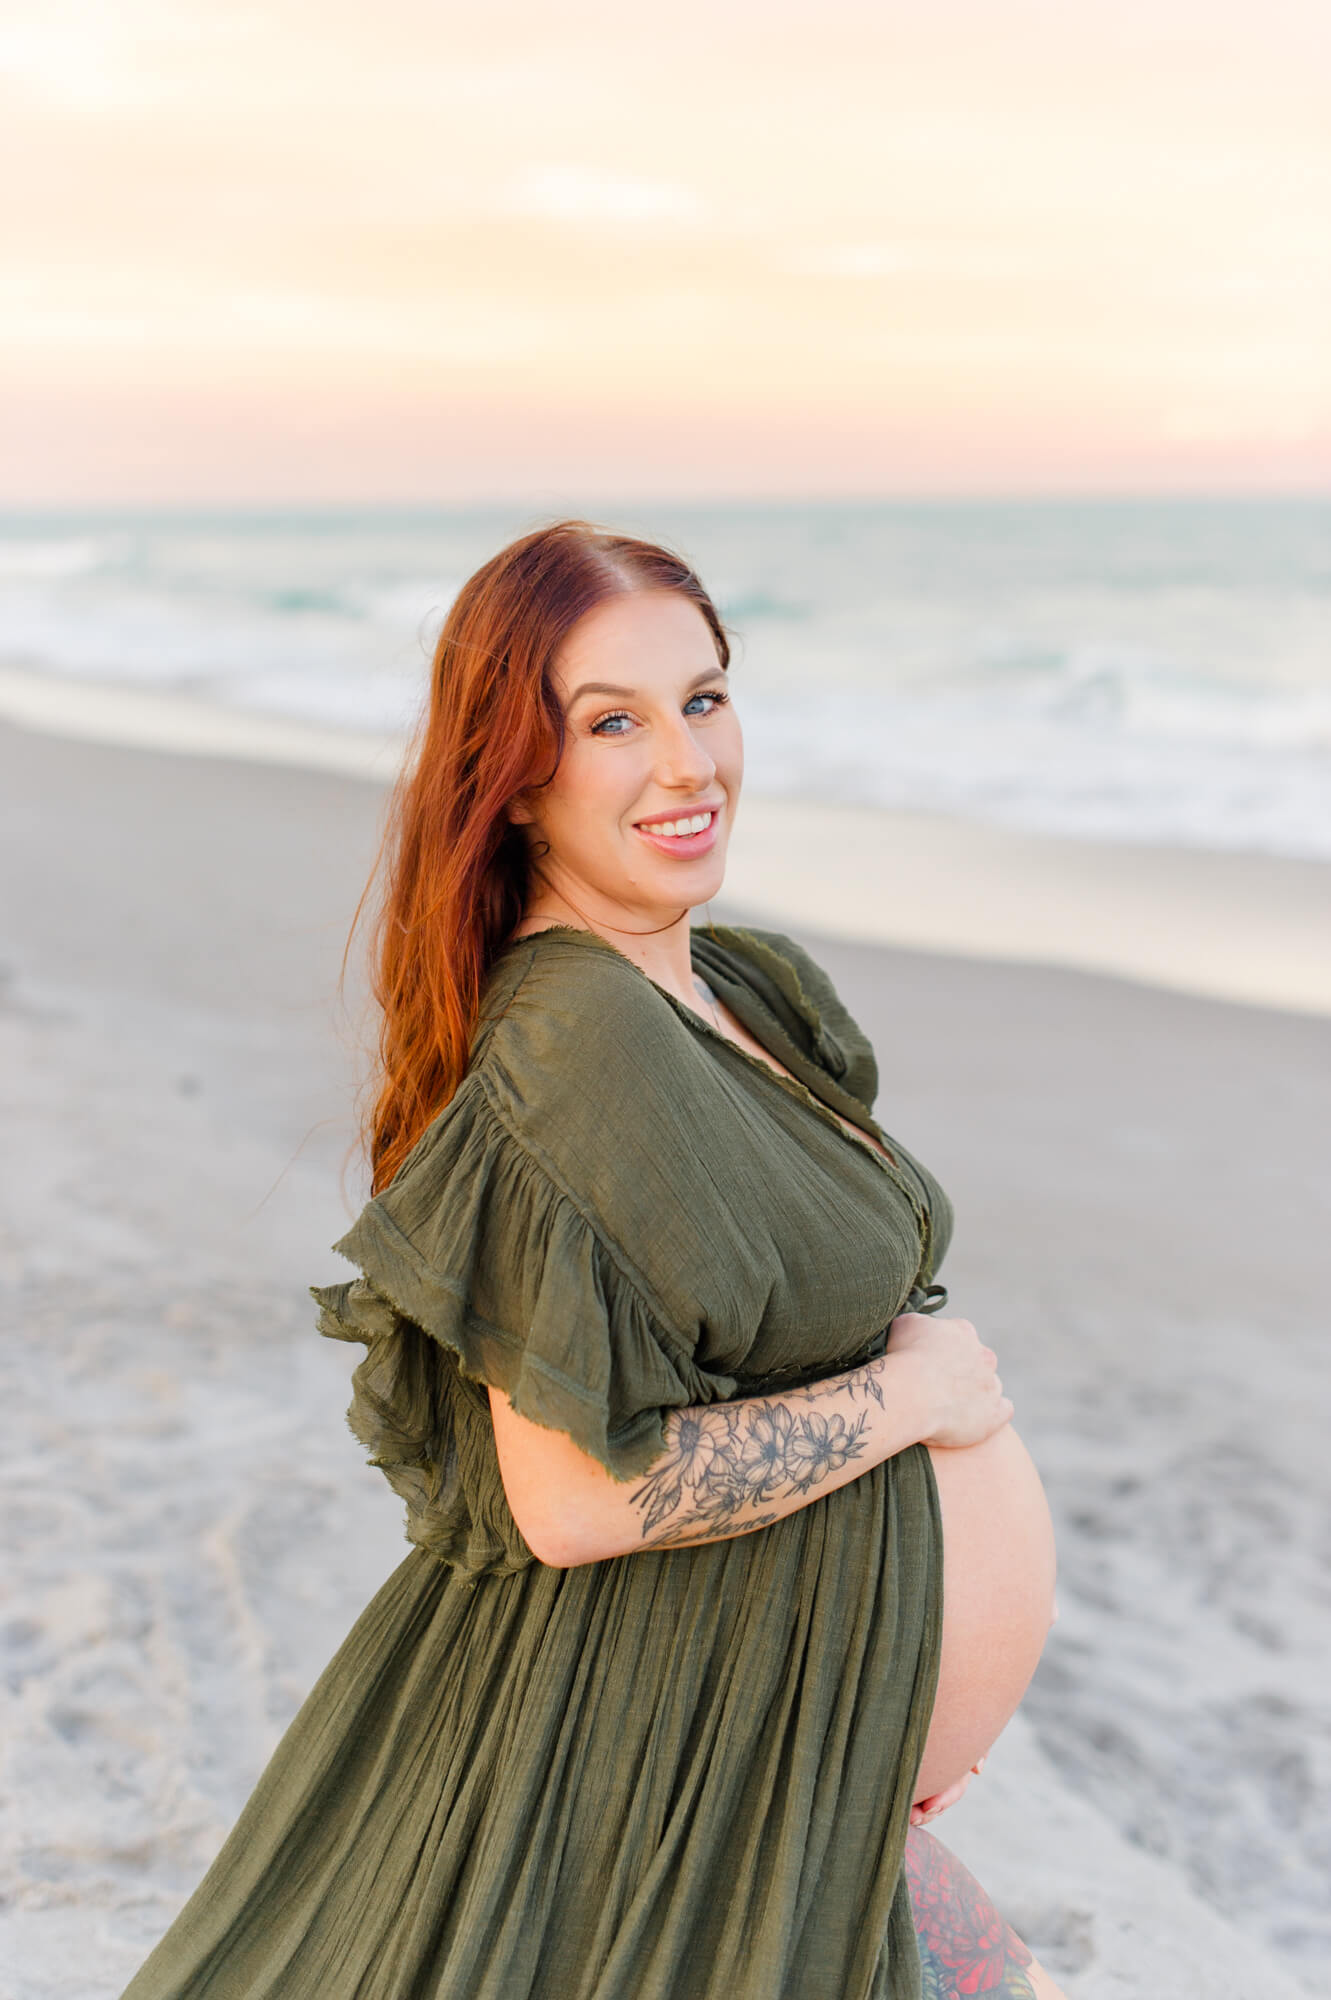 Beautiful expectant mother smiles at the camera while wearing a green maternity dress and standing near the shoreline.